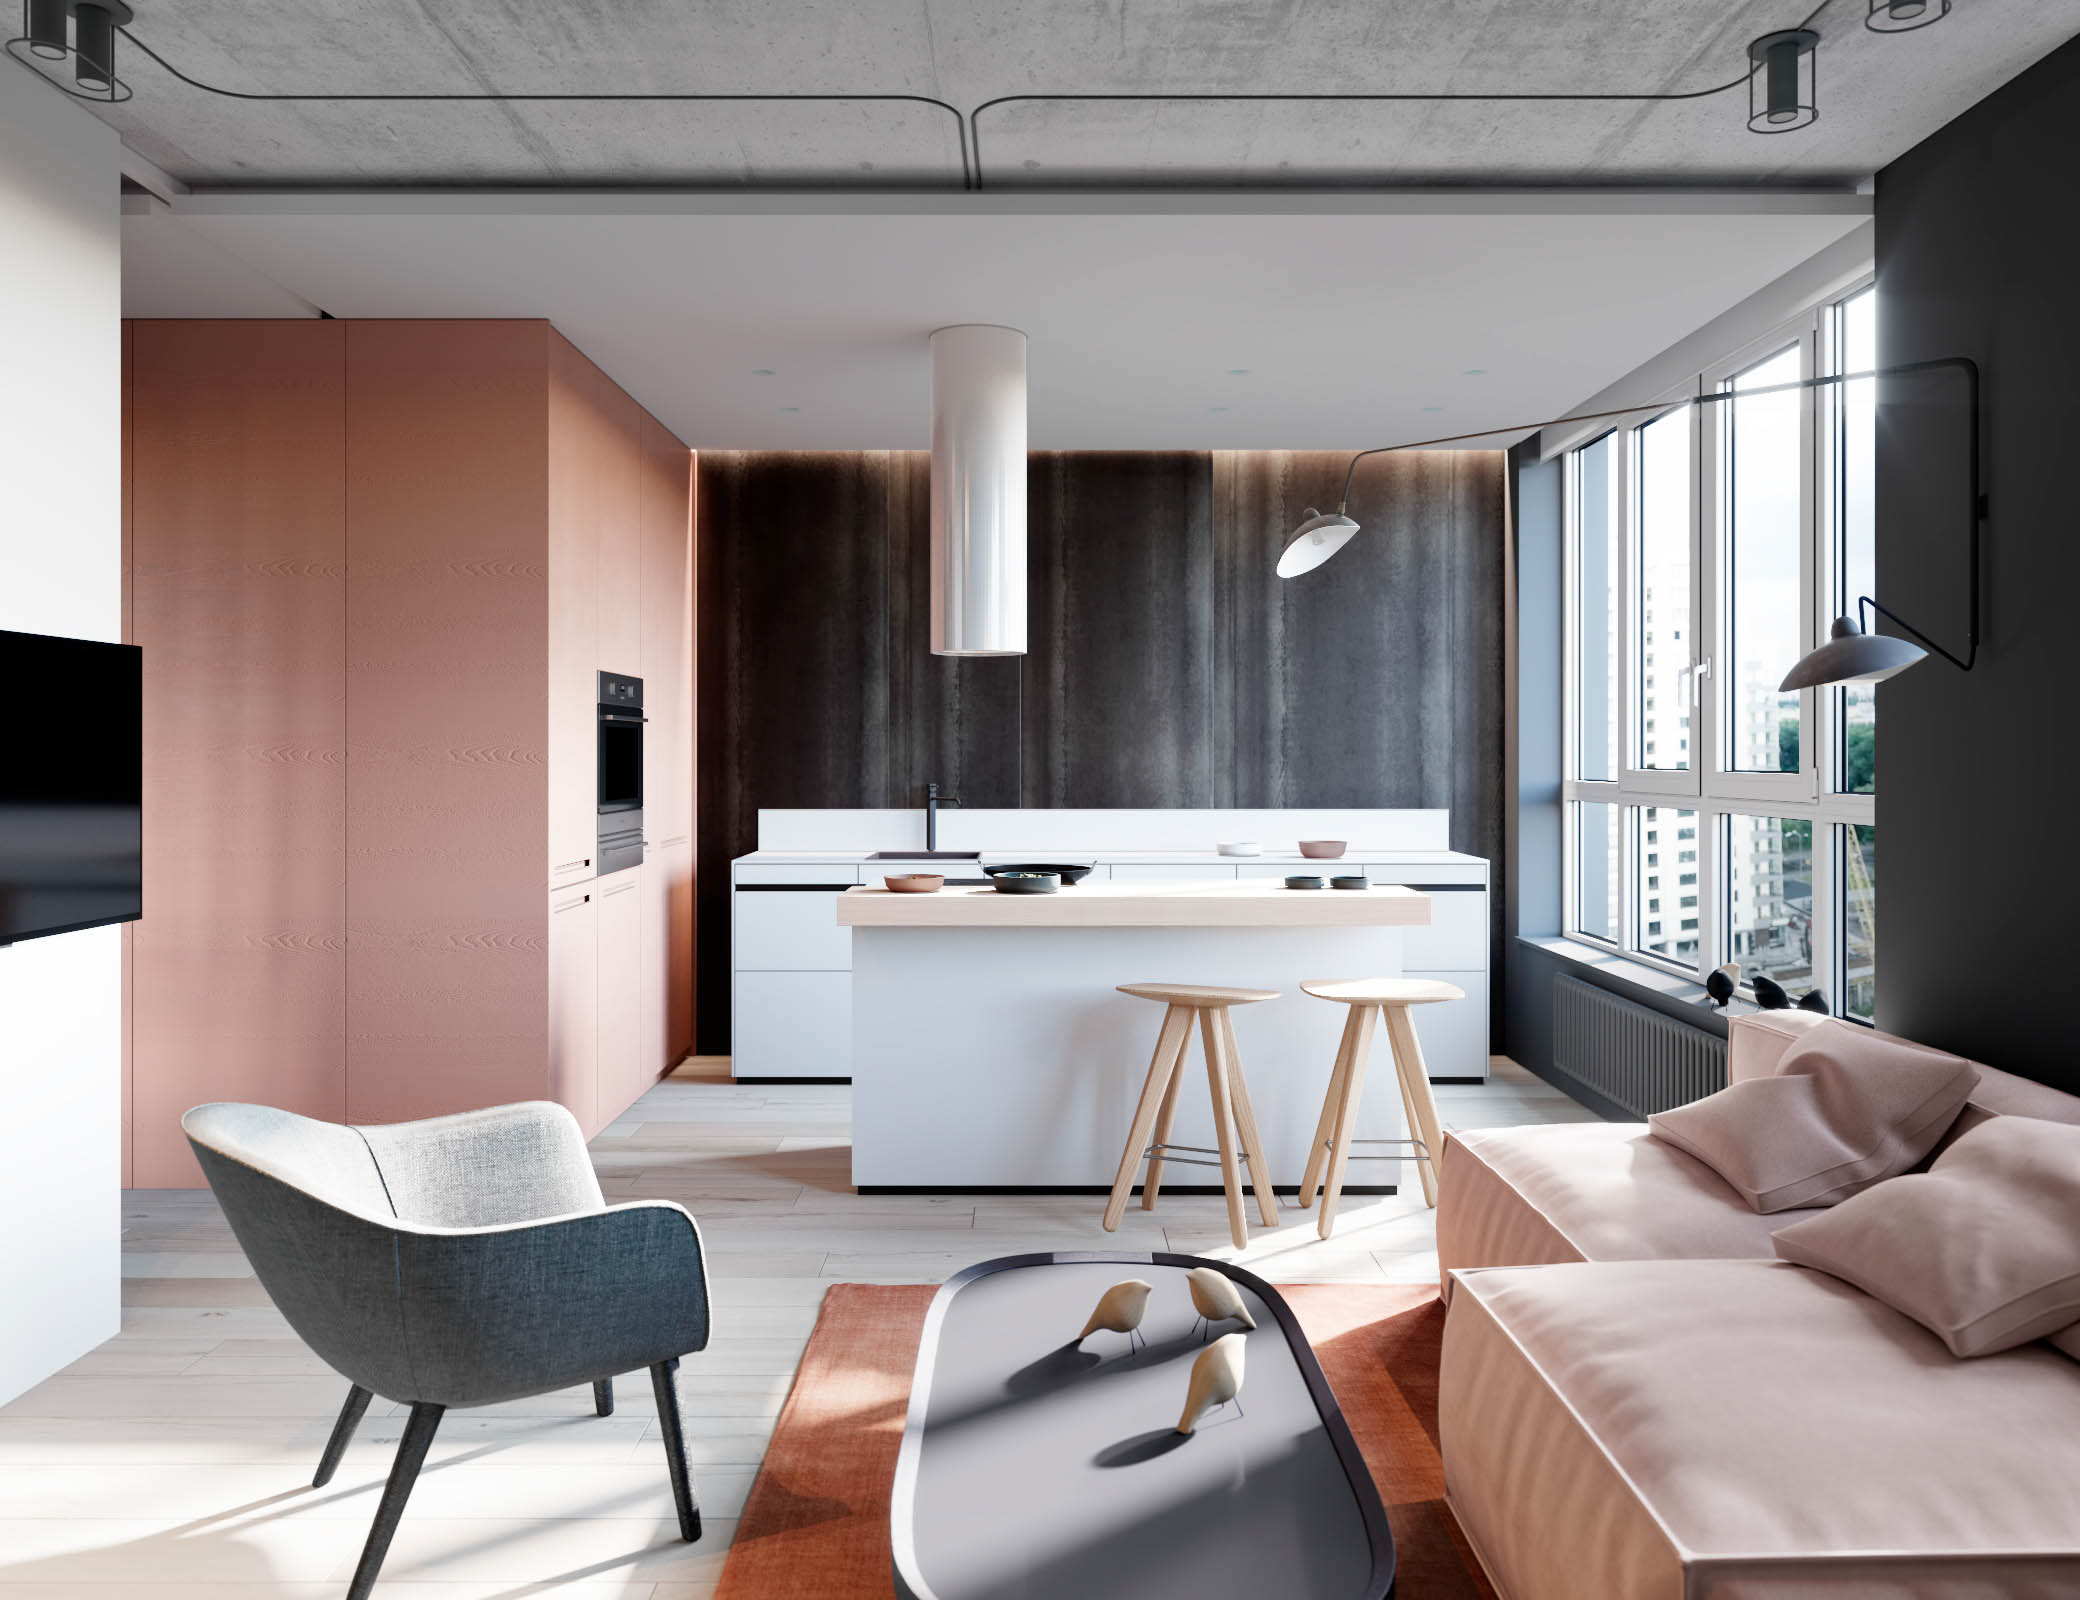 Dusty Pink - Check How to Use It in Interior Design